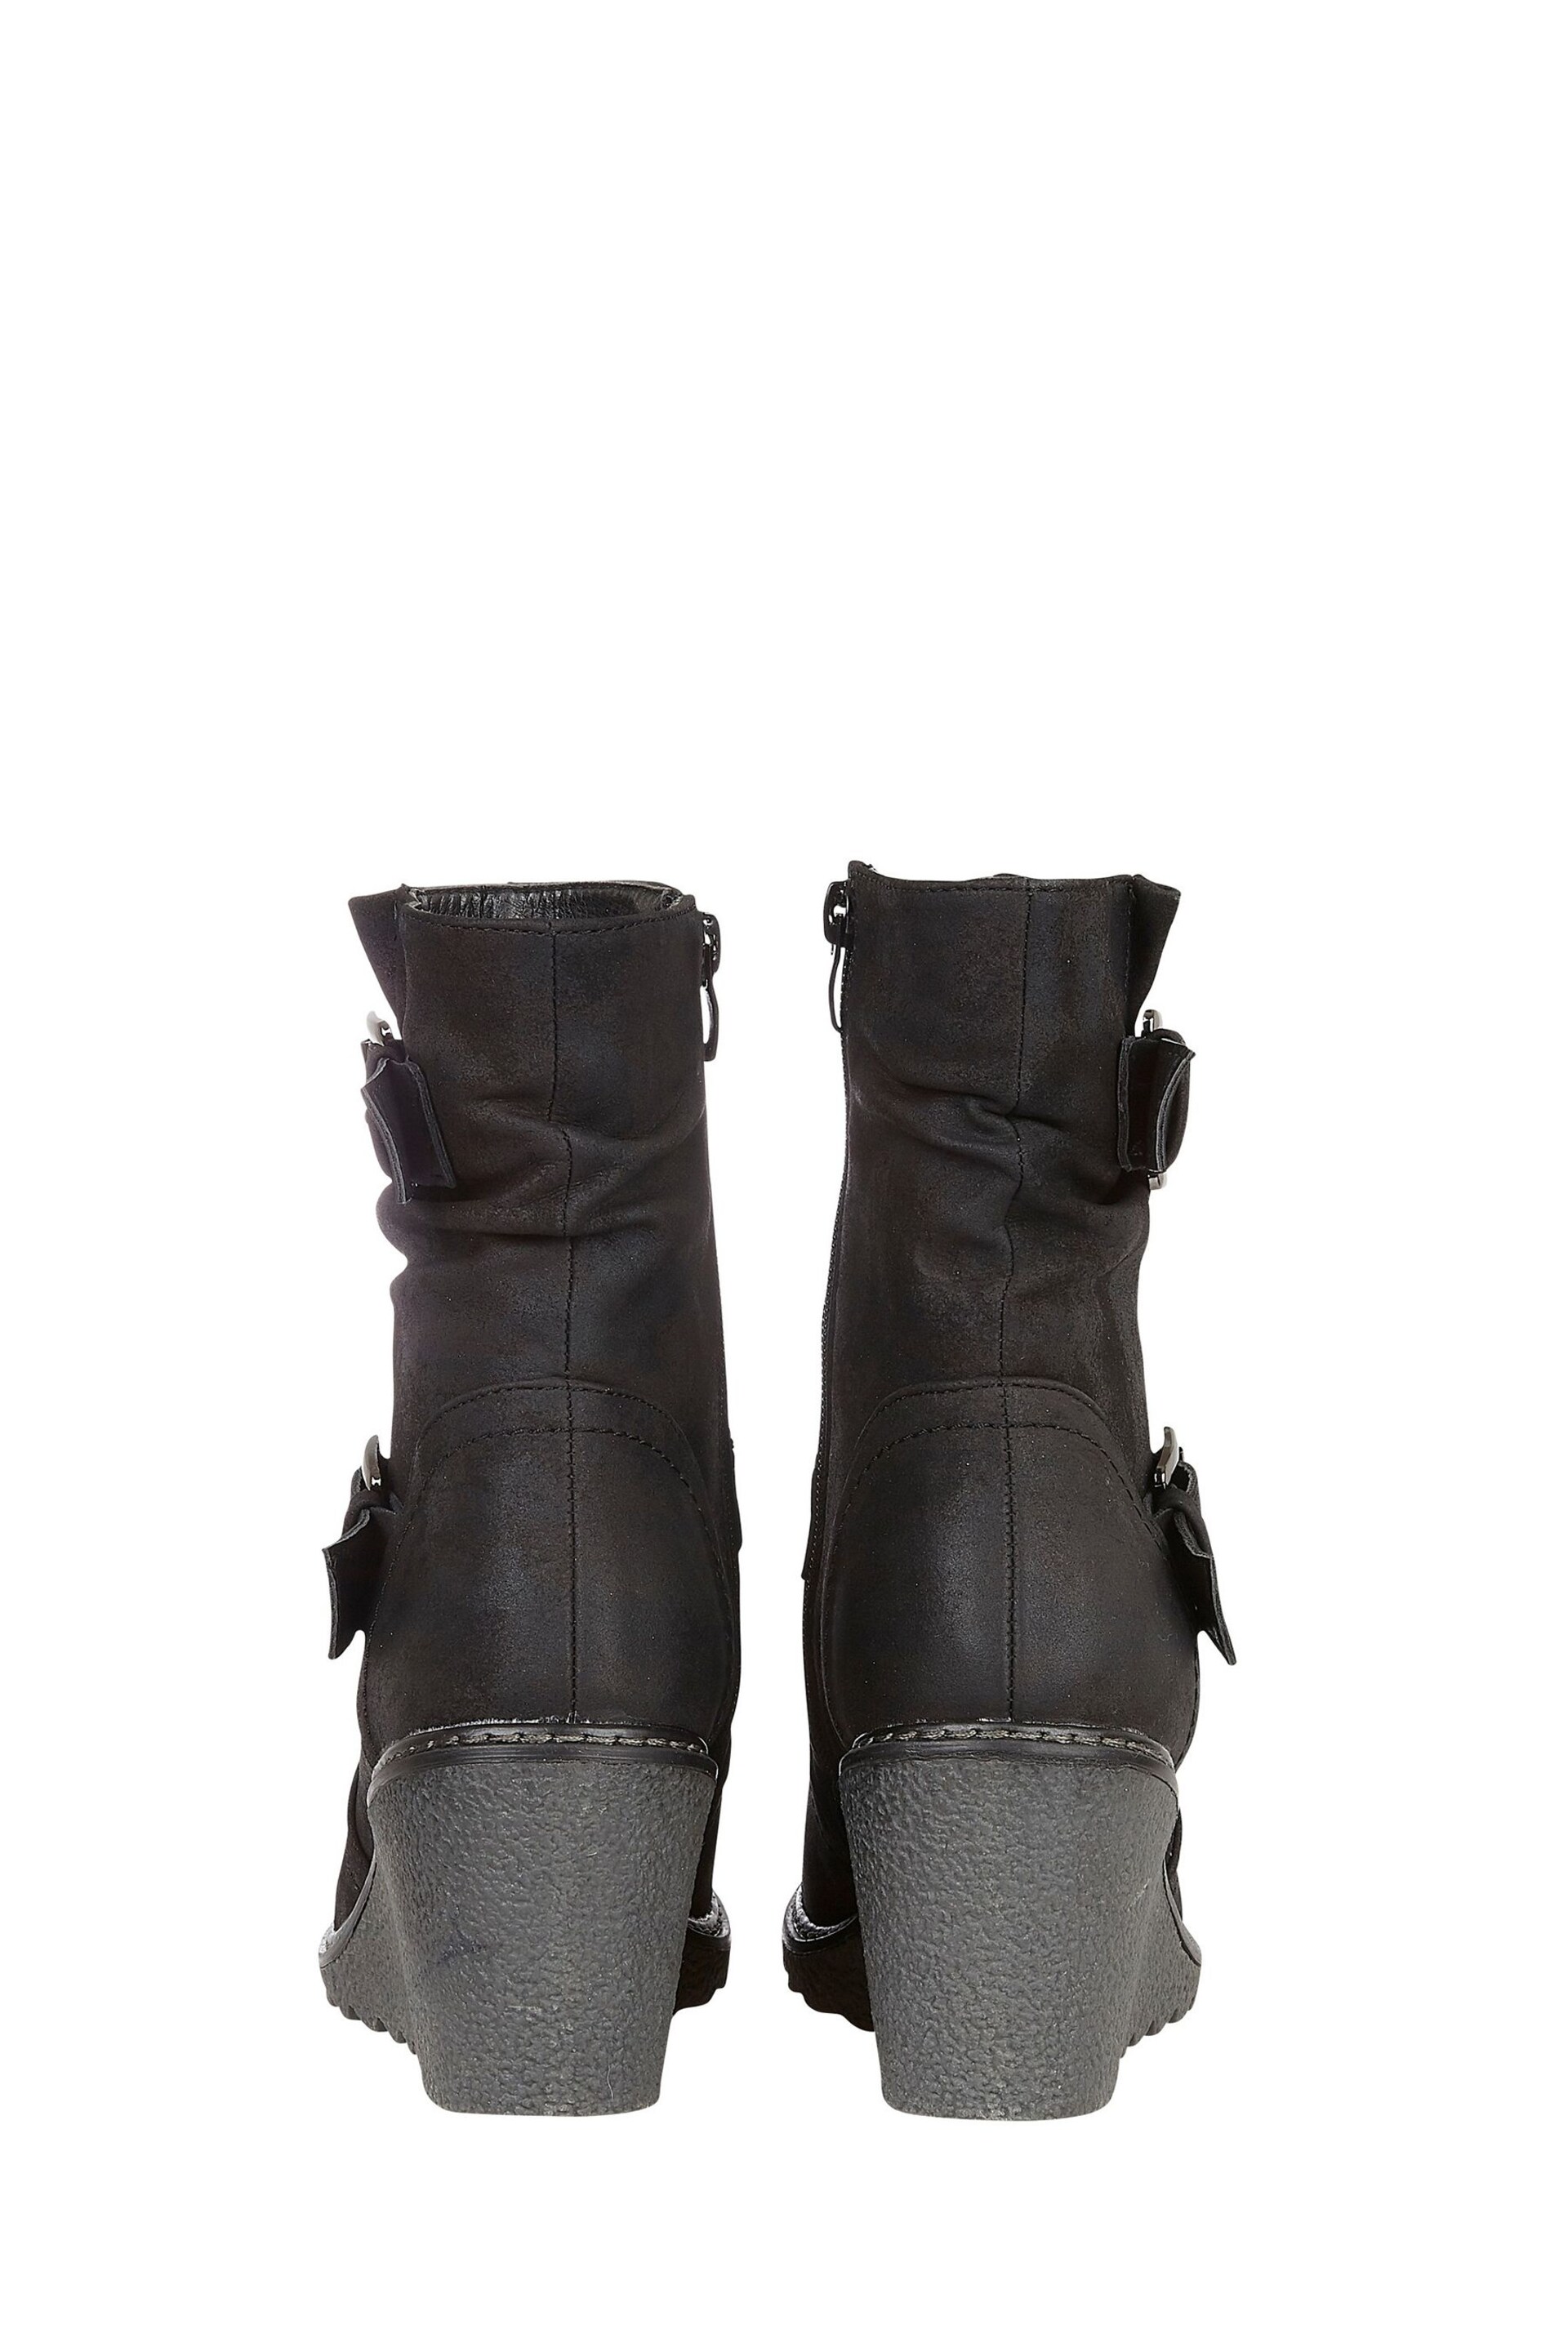 Lotus Black Wedge Ankle Boots - Image 3 of 3